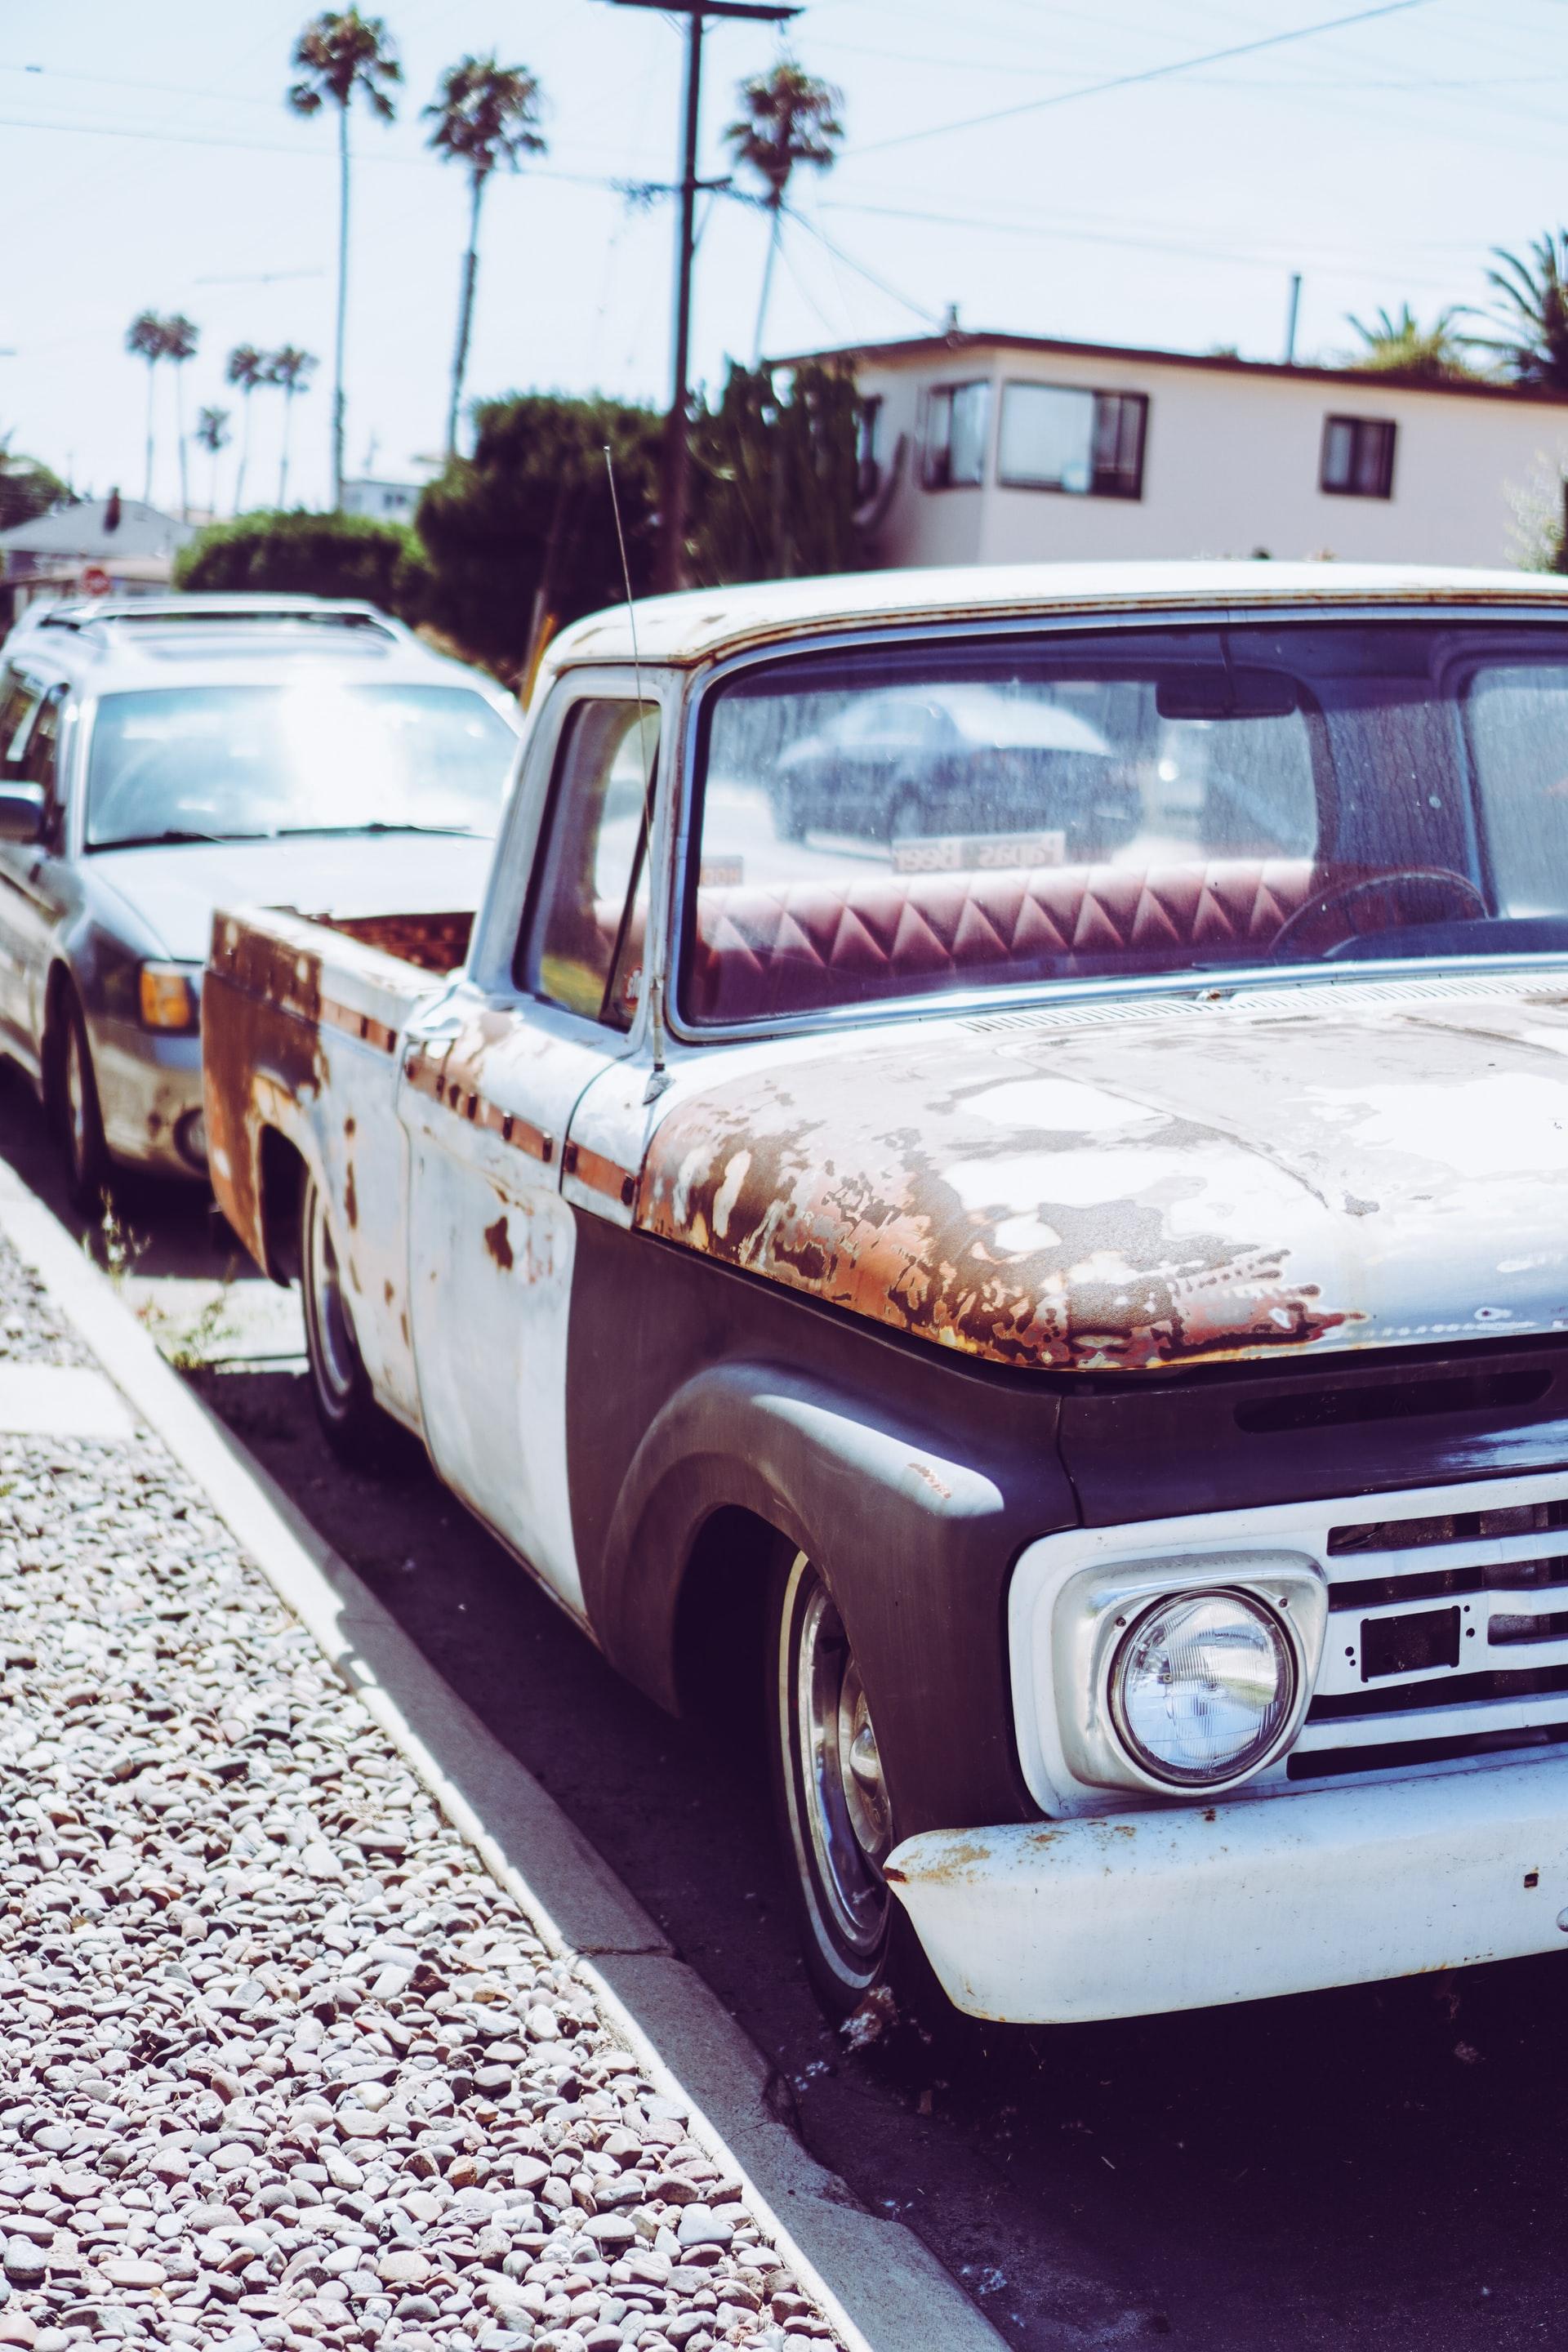 The classic Chevy OBS “Old Body Style” trucks have unforgettable character. 